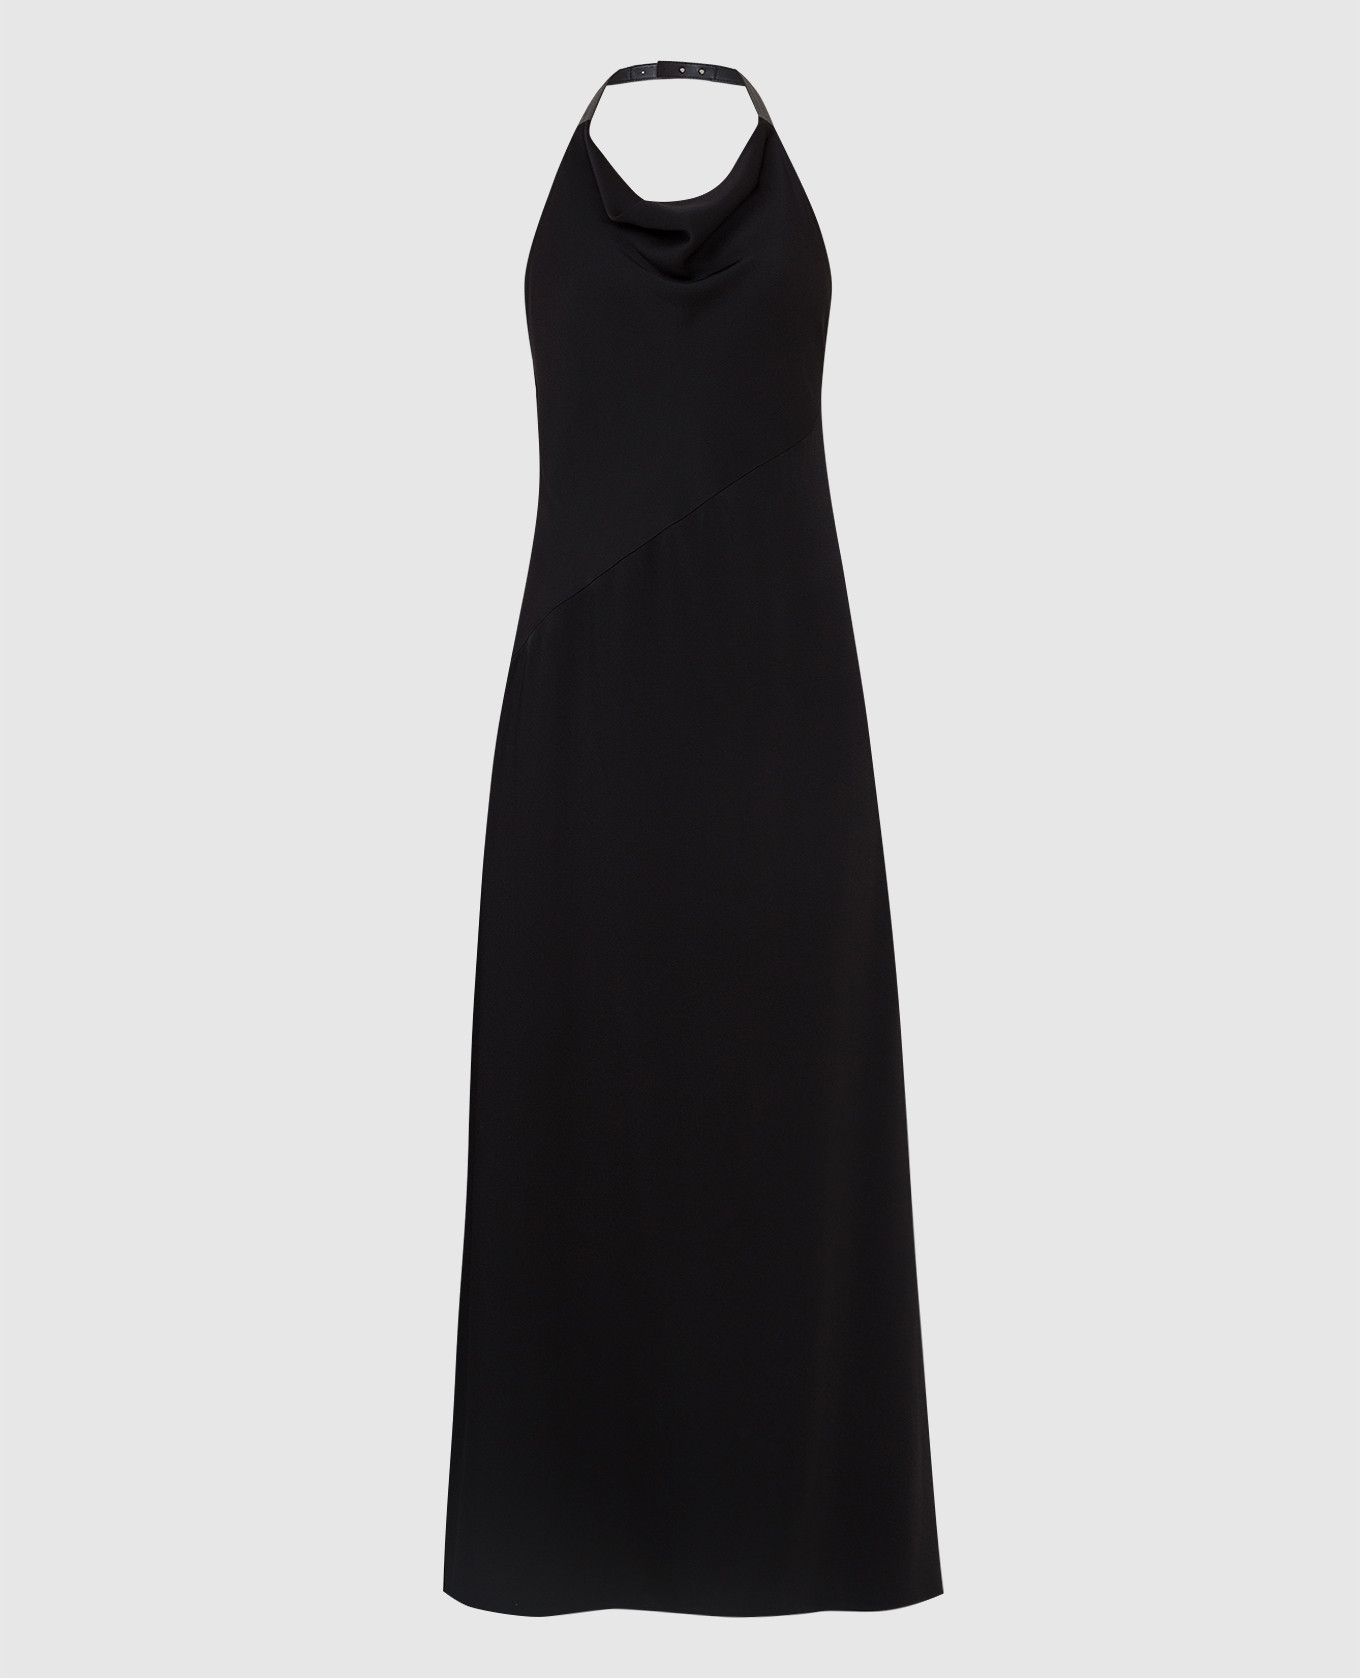 Black dress with slit and drapery